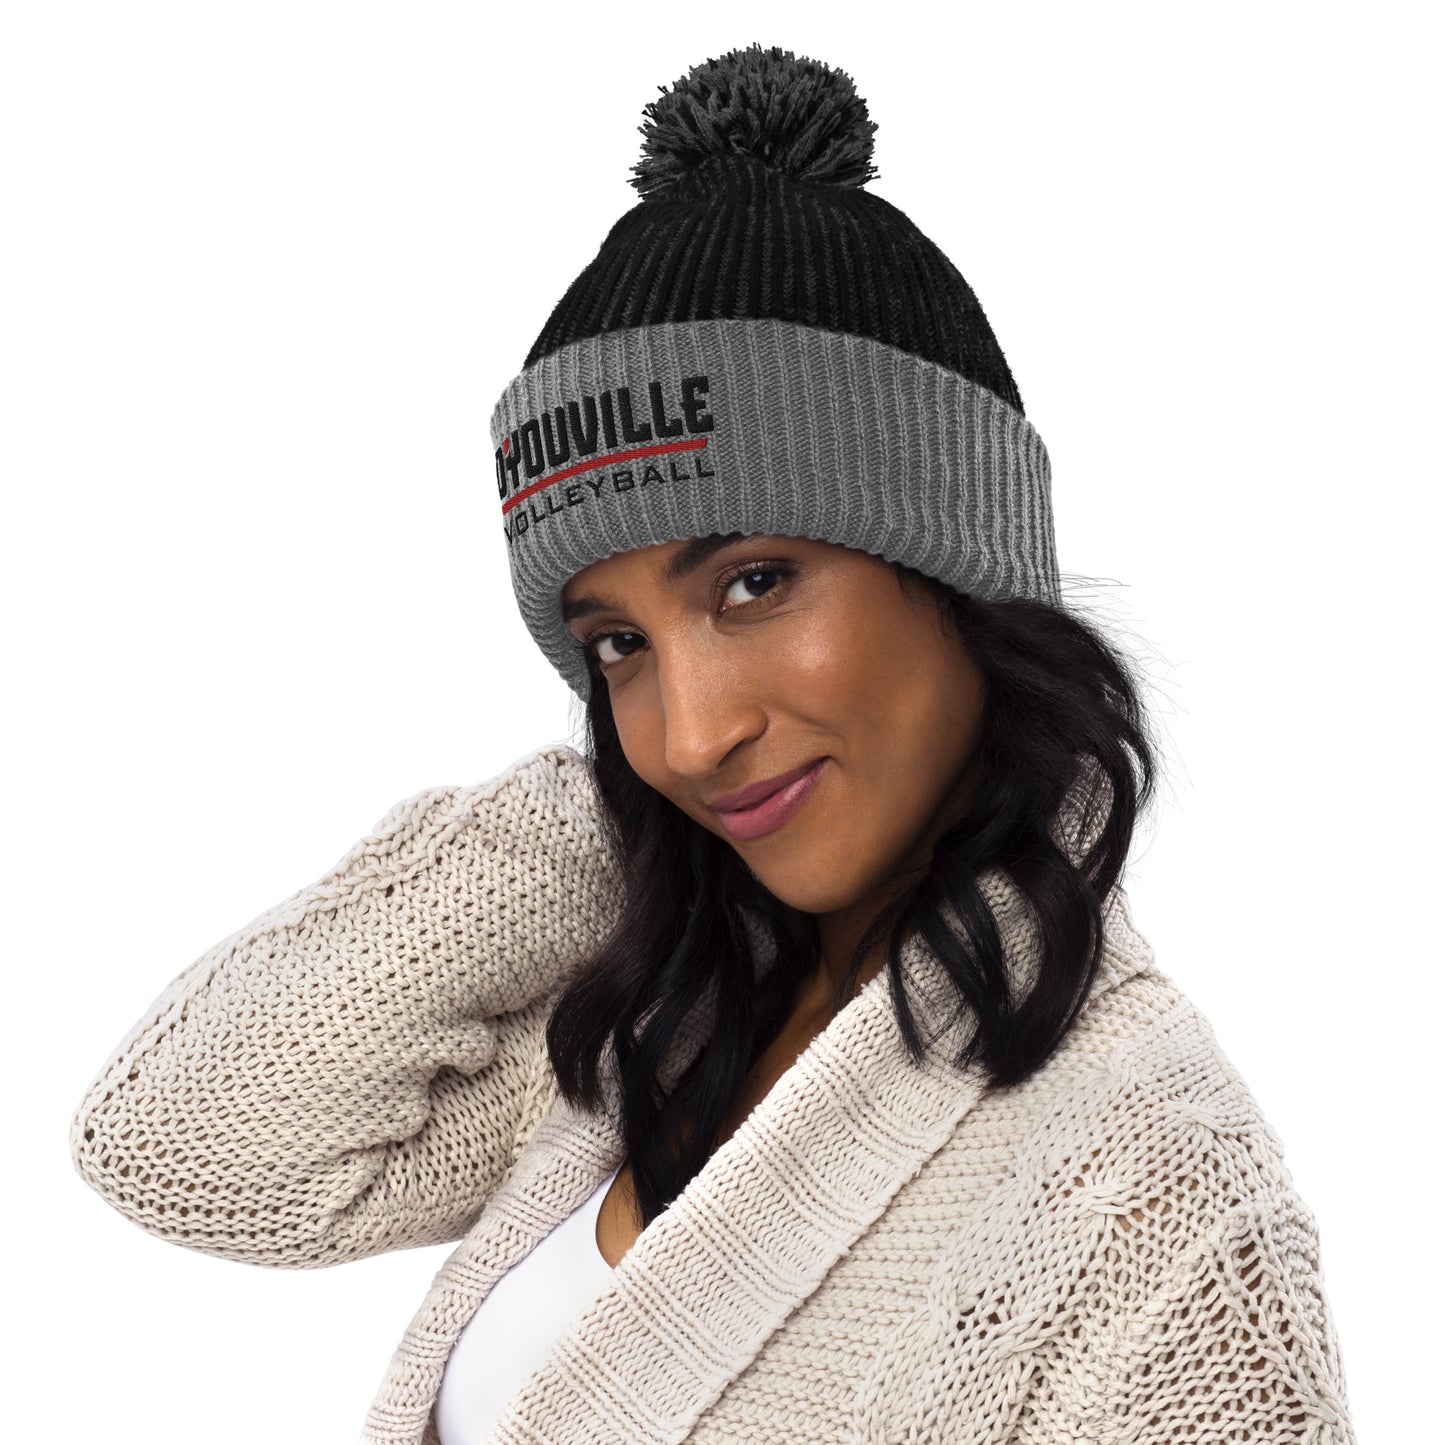 D'Youville Volleyball Pom-Pom Beanie